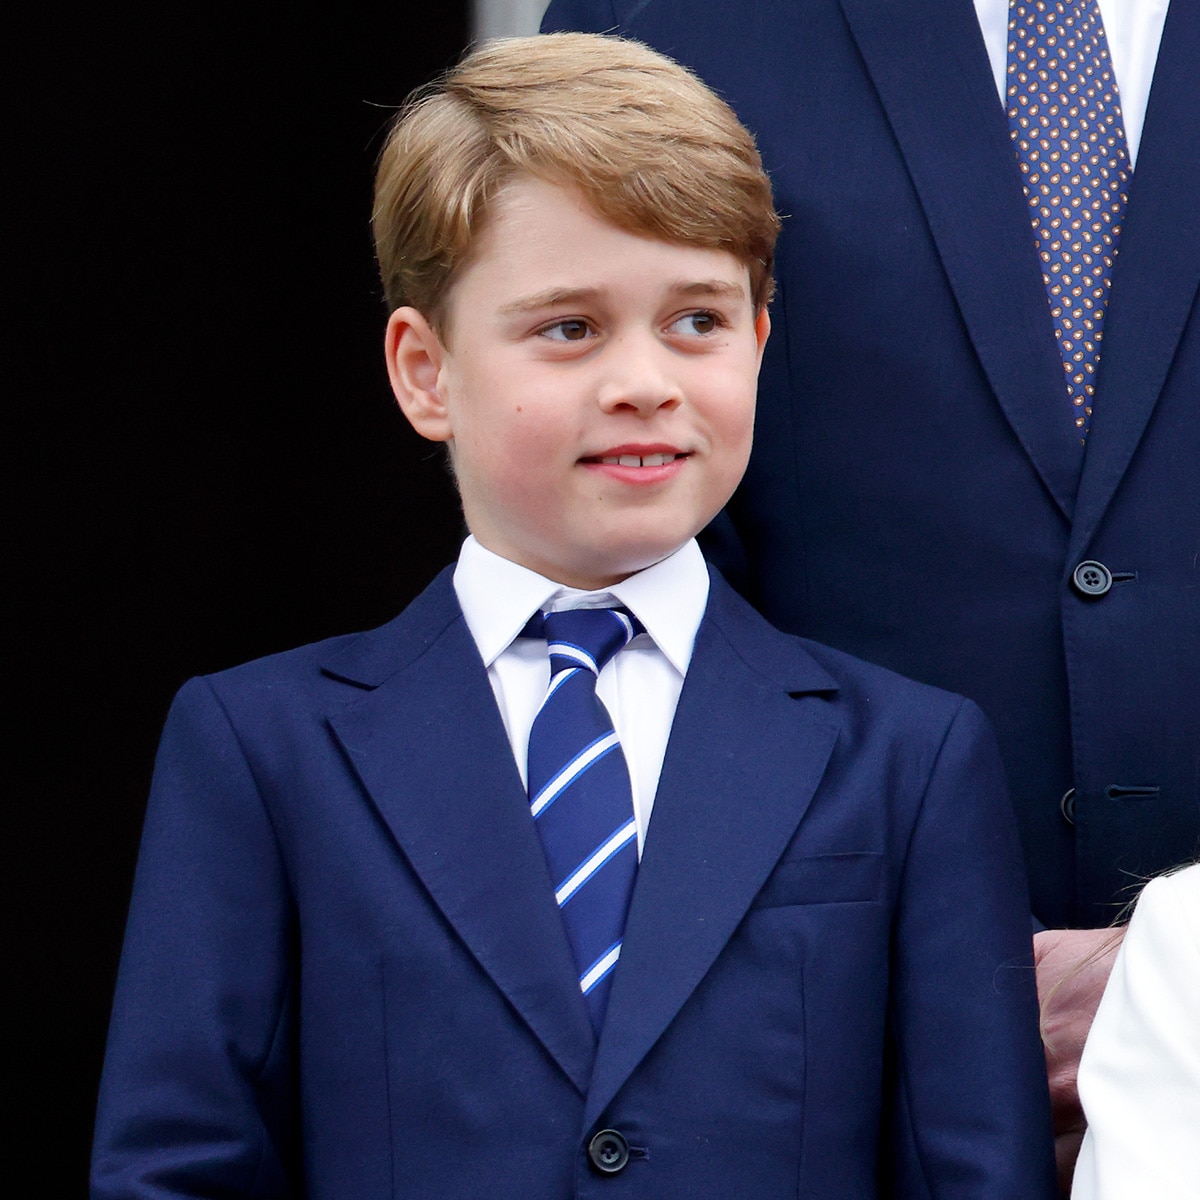 Prince George's Role in King Charles III's Royal Coronation Revealed